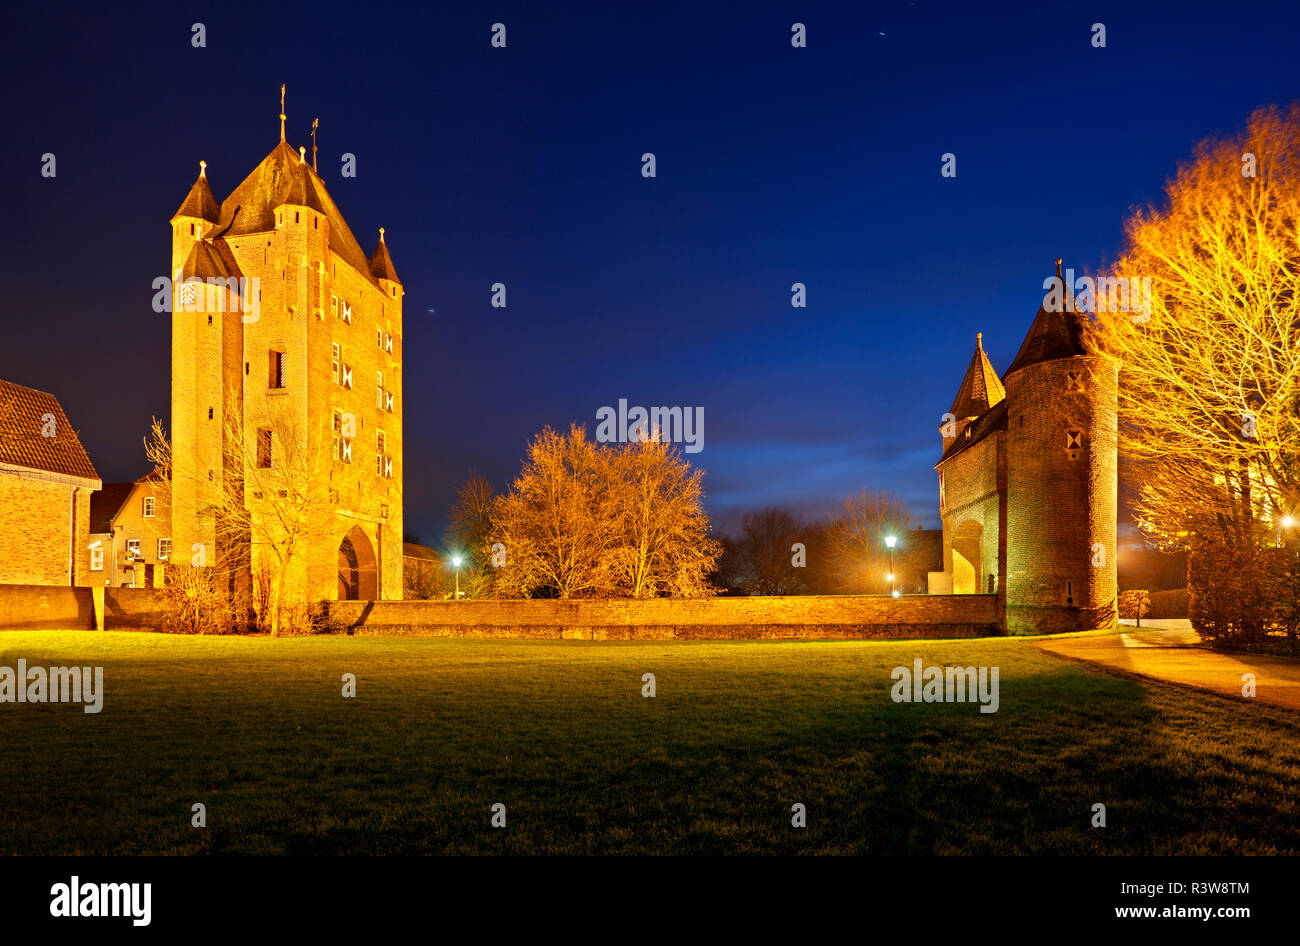 The old Kleve Gate (Klever Tor) in Xanten, Germany. Panoramic night shot with blue sky. Stock Photo